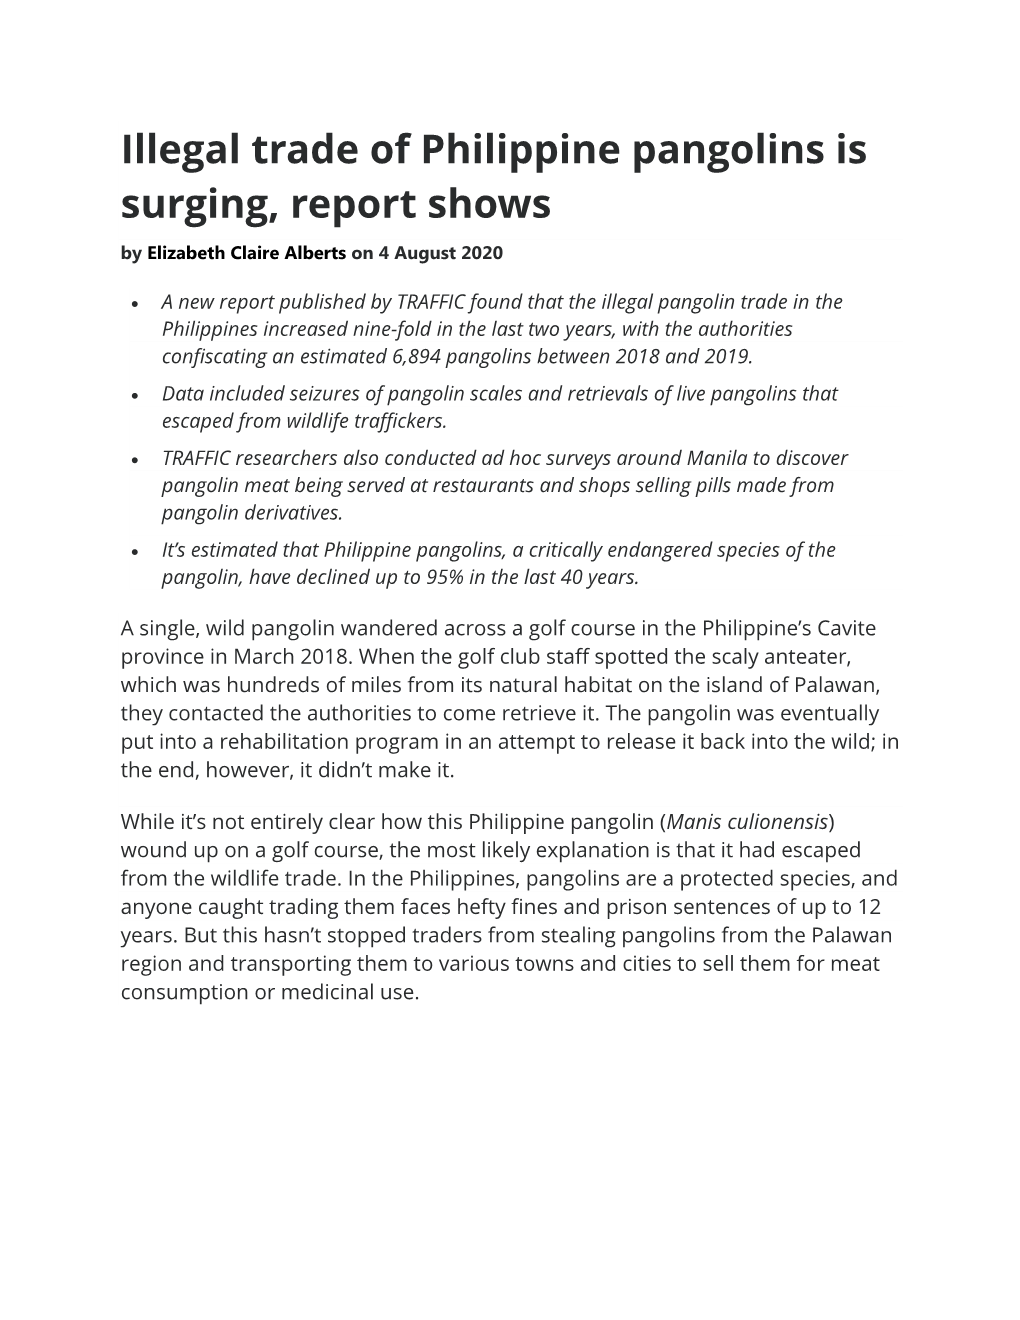 Illegal Trade of Philippine Pangolins Is Surging, Report Shows by Elizabeth Claire Alberts on 4 August 2020